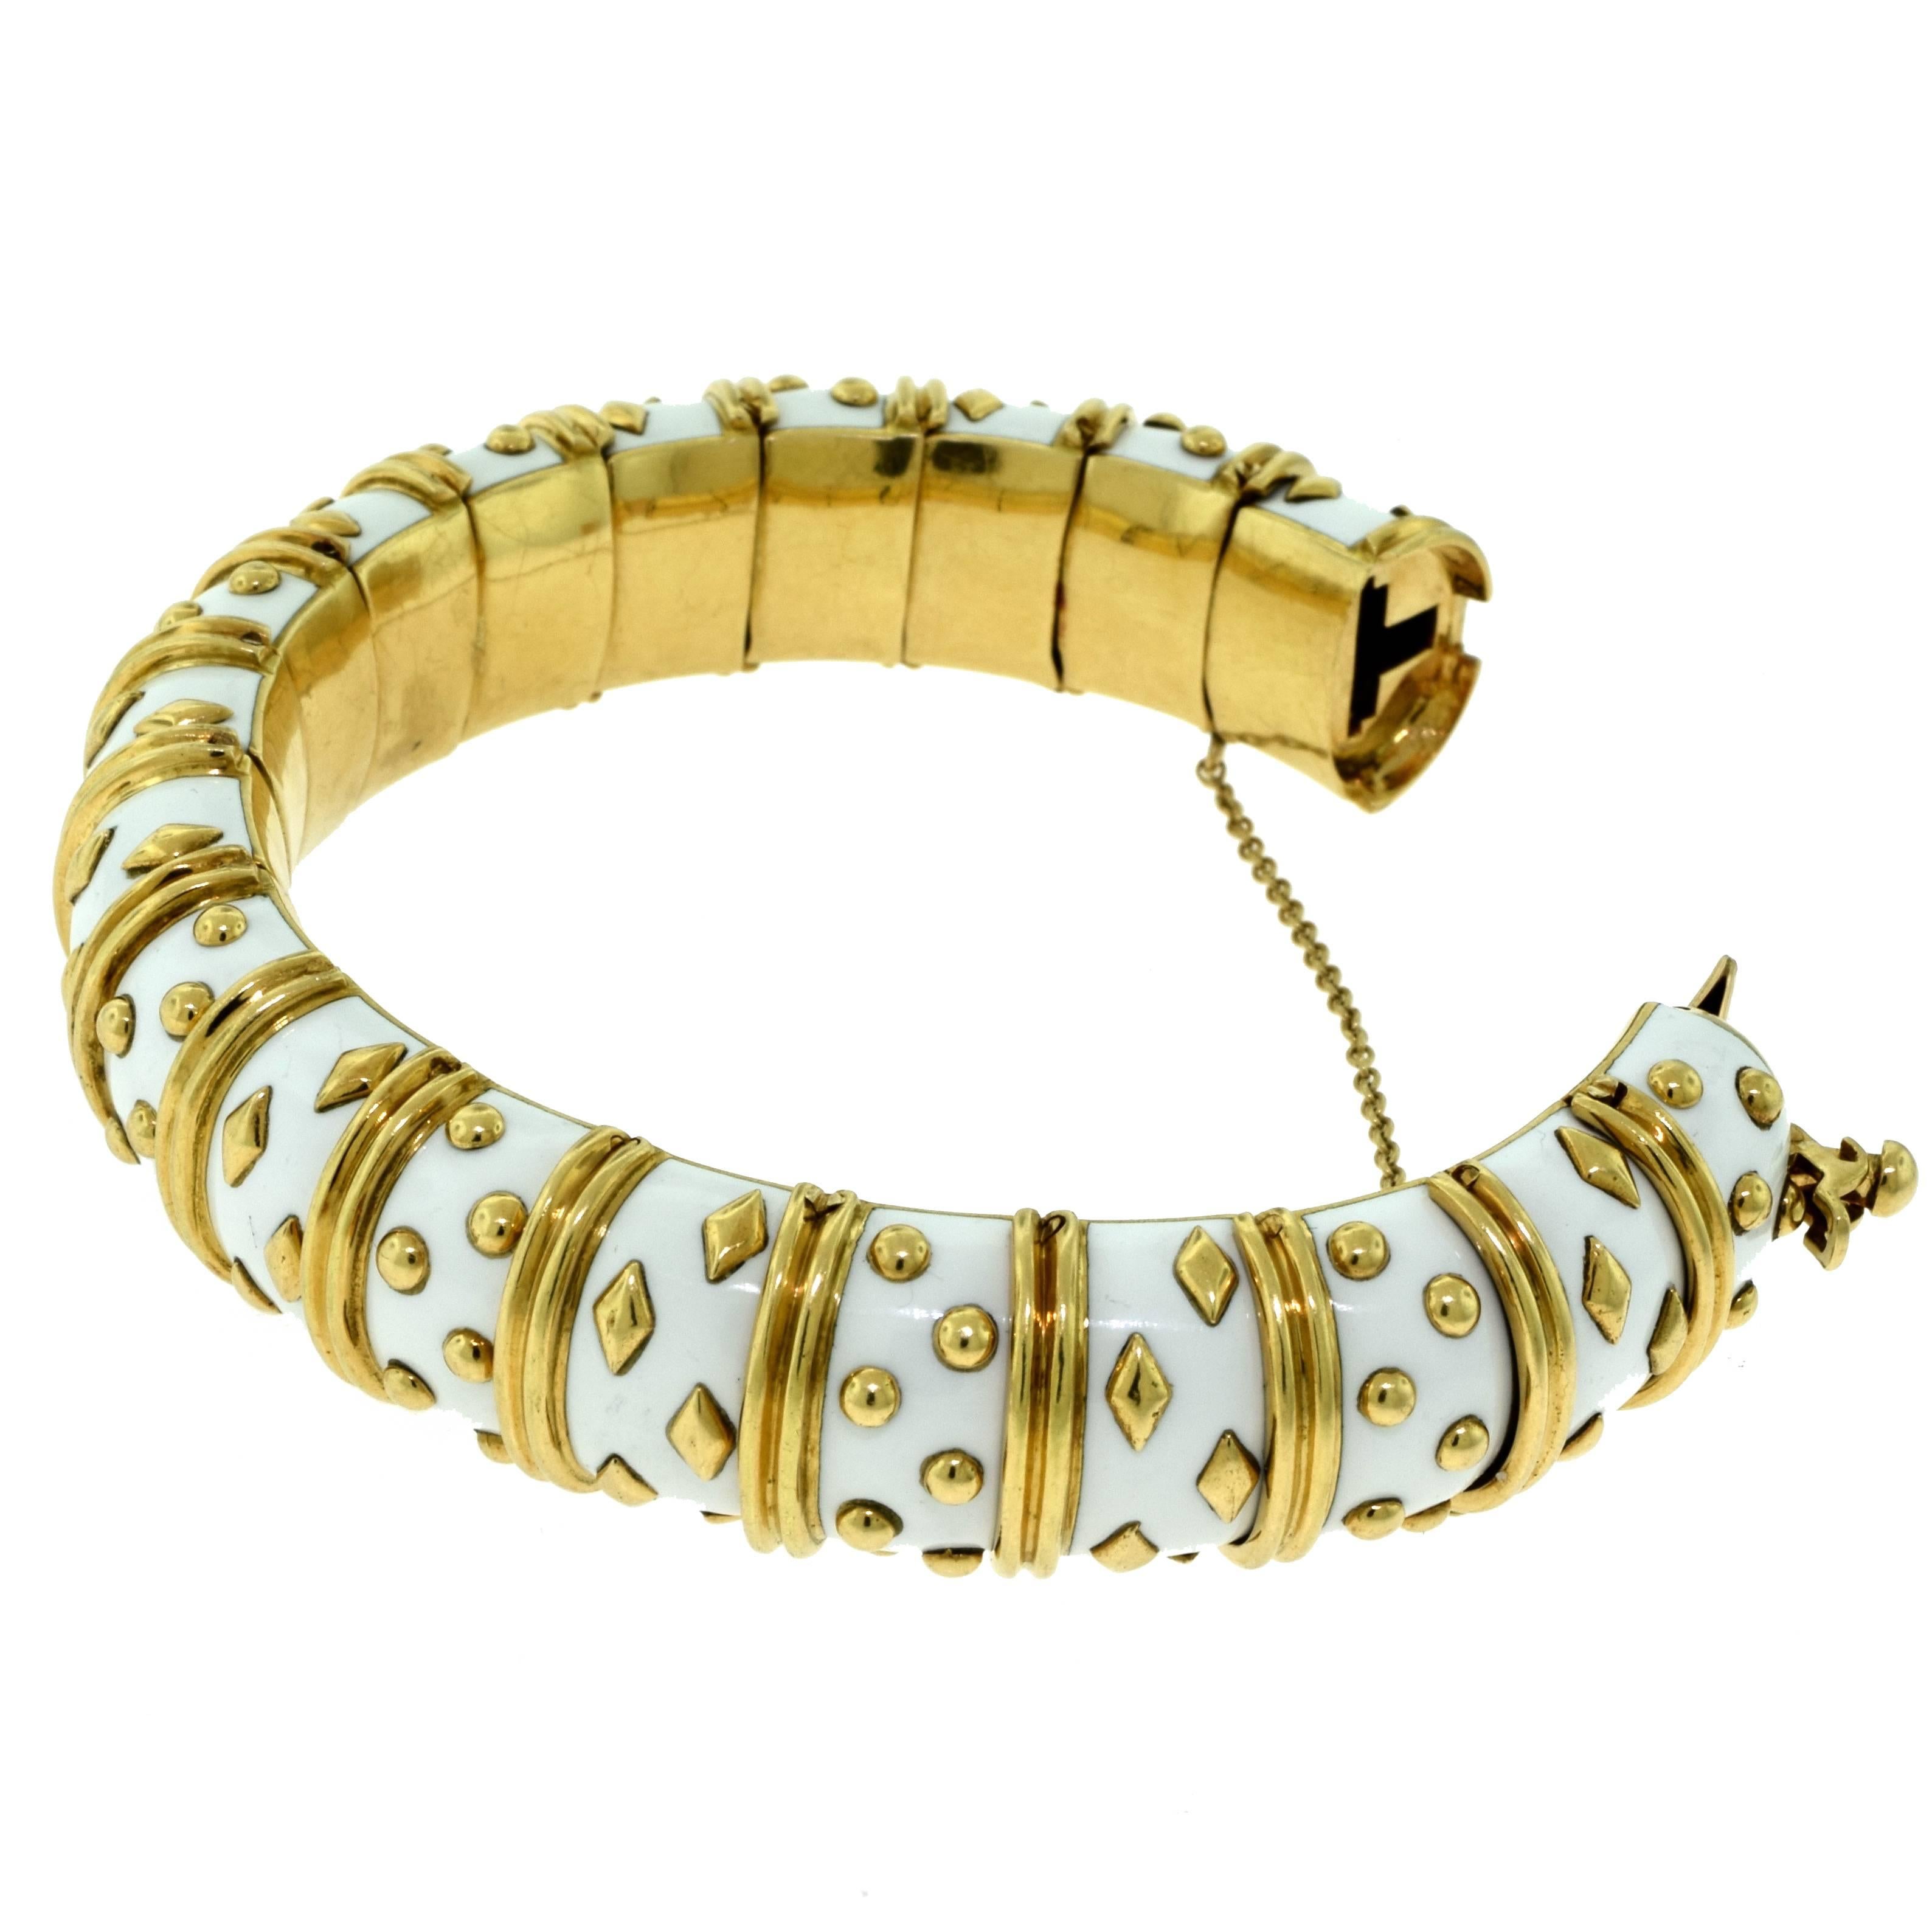 Schlumberger by Tiffany & Co. White Enamel Dot Losange Paillonne Bracelet In Excellent Condition For Sale In Miami, FL